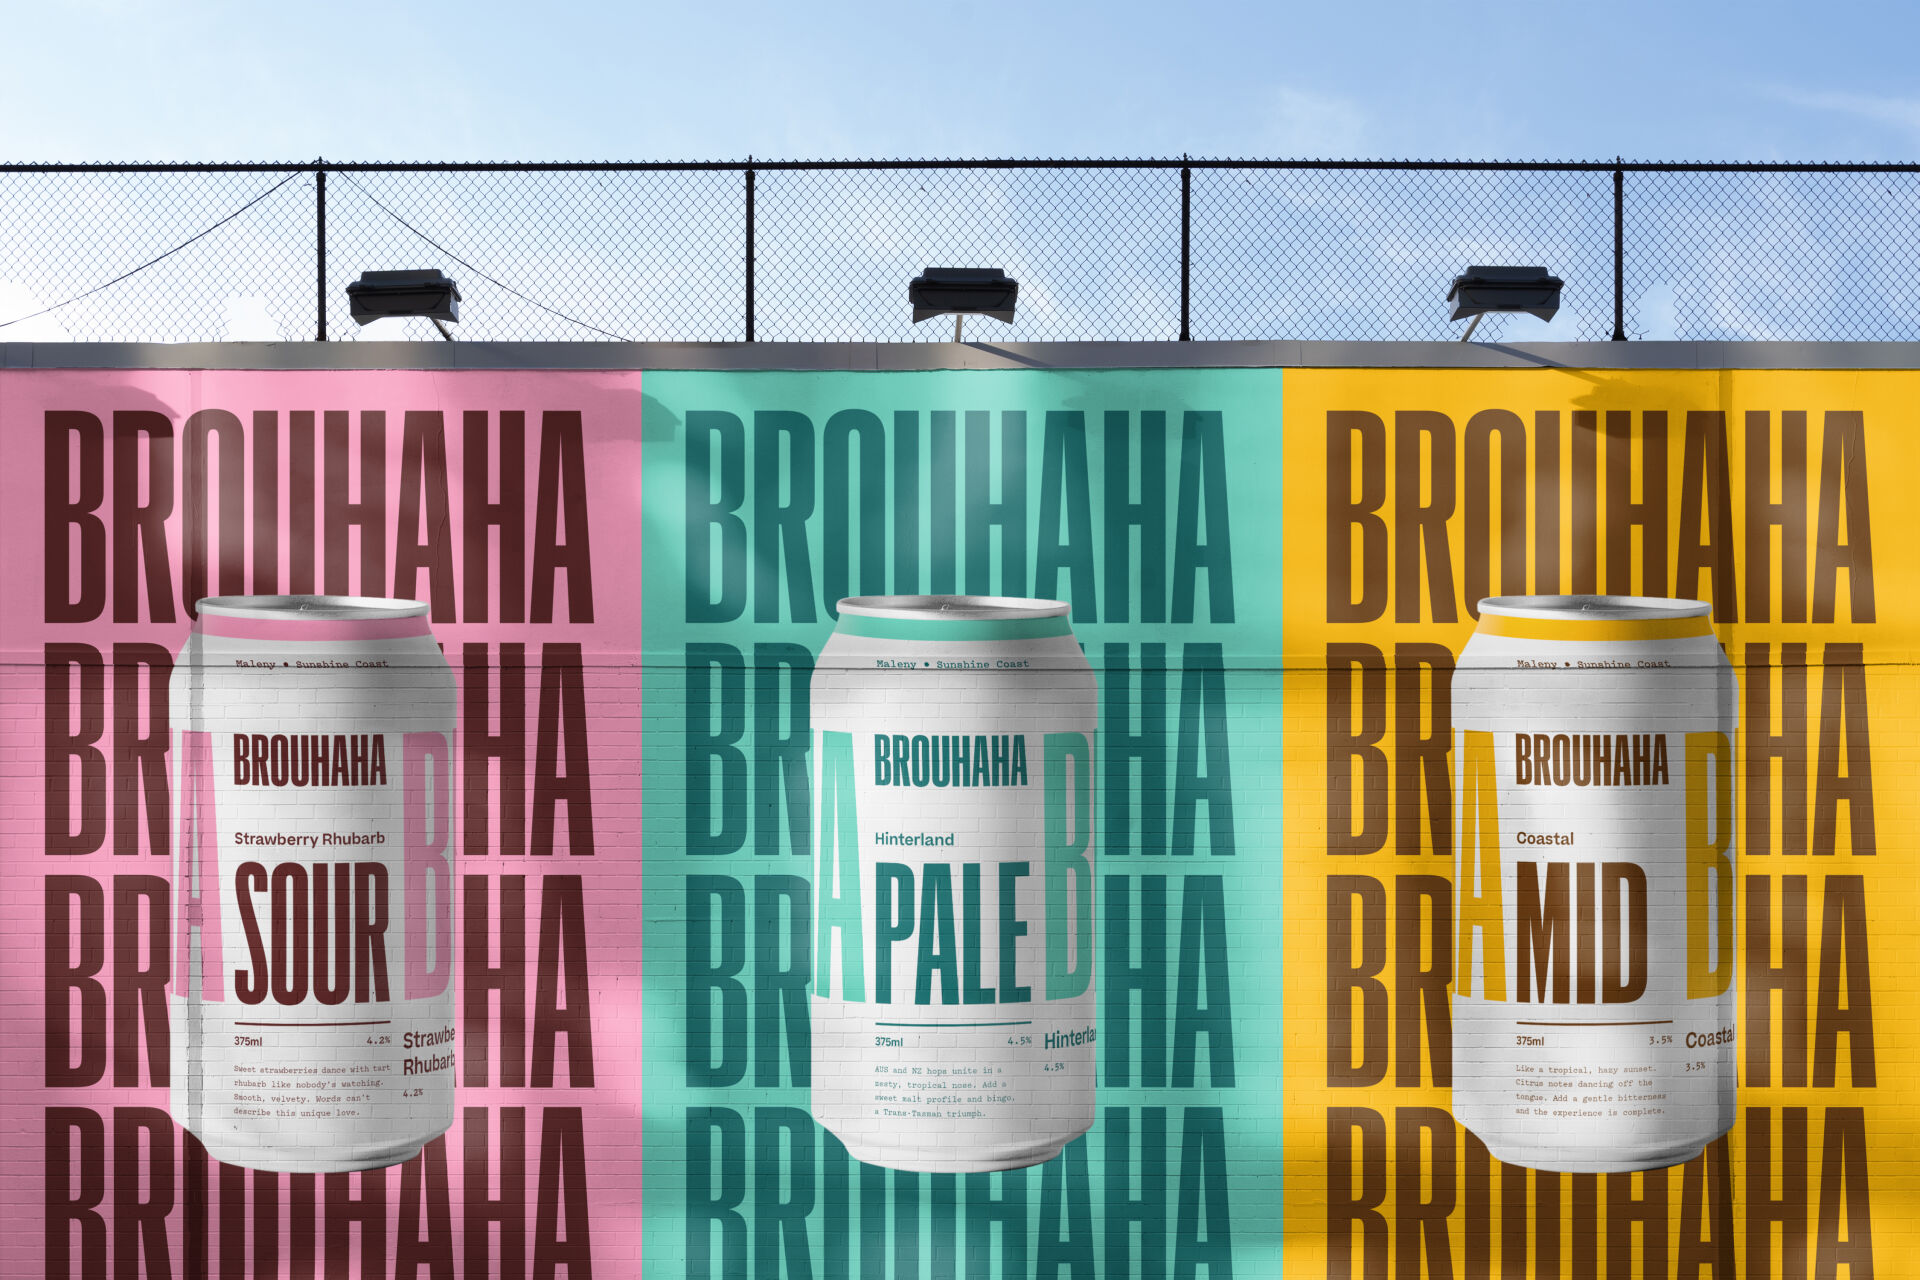 Modern beer design featuring bold typography